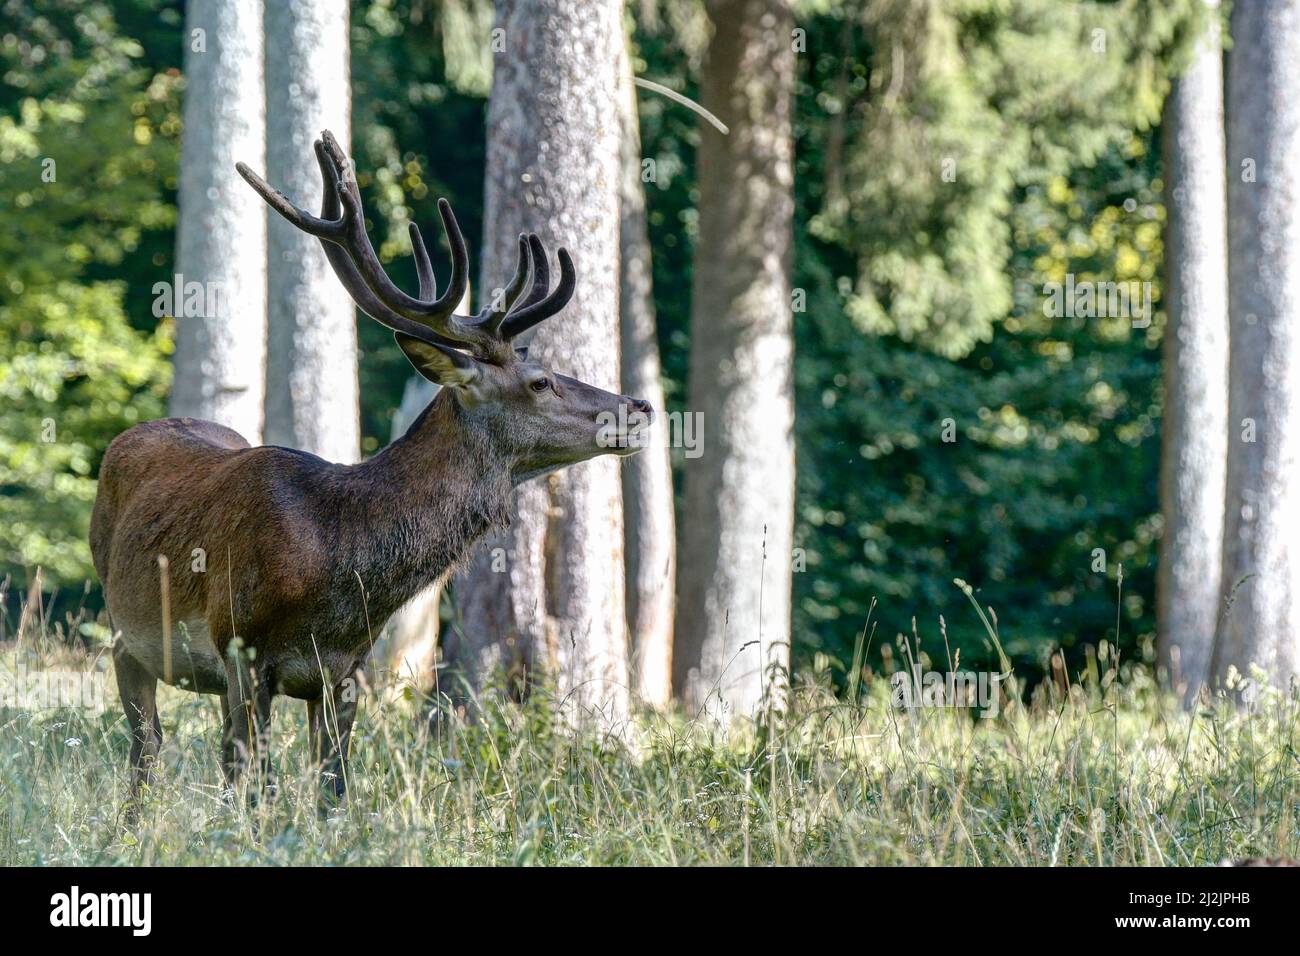 Red deer with raffia antlers got wind. In the red deer, the sensory organs are particularly sensitive. Stock Photo